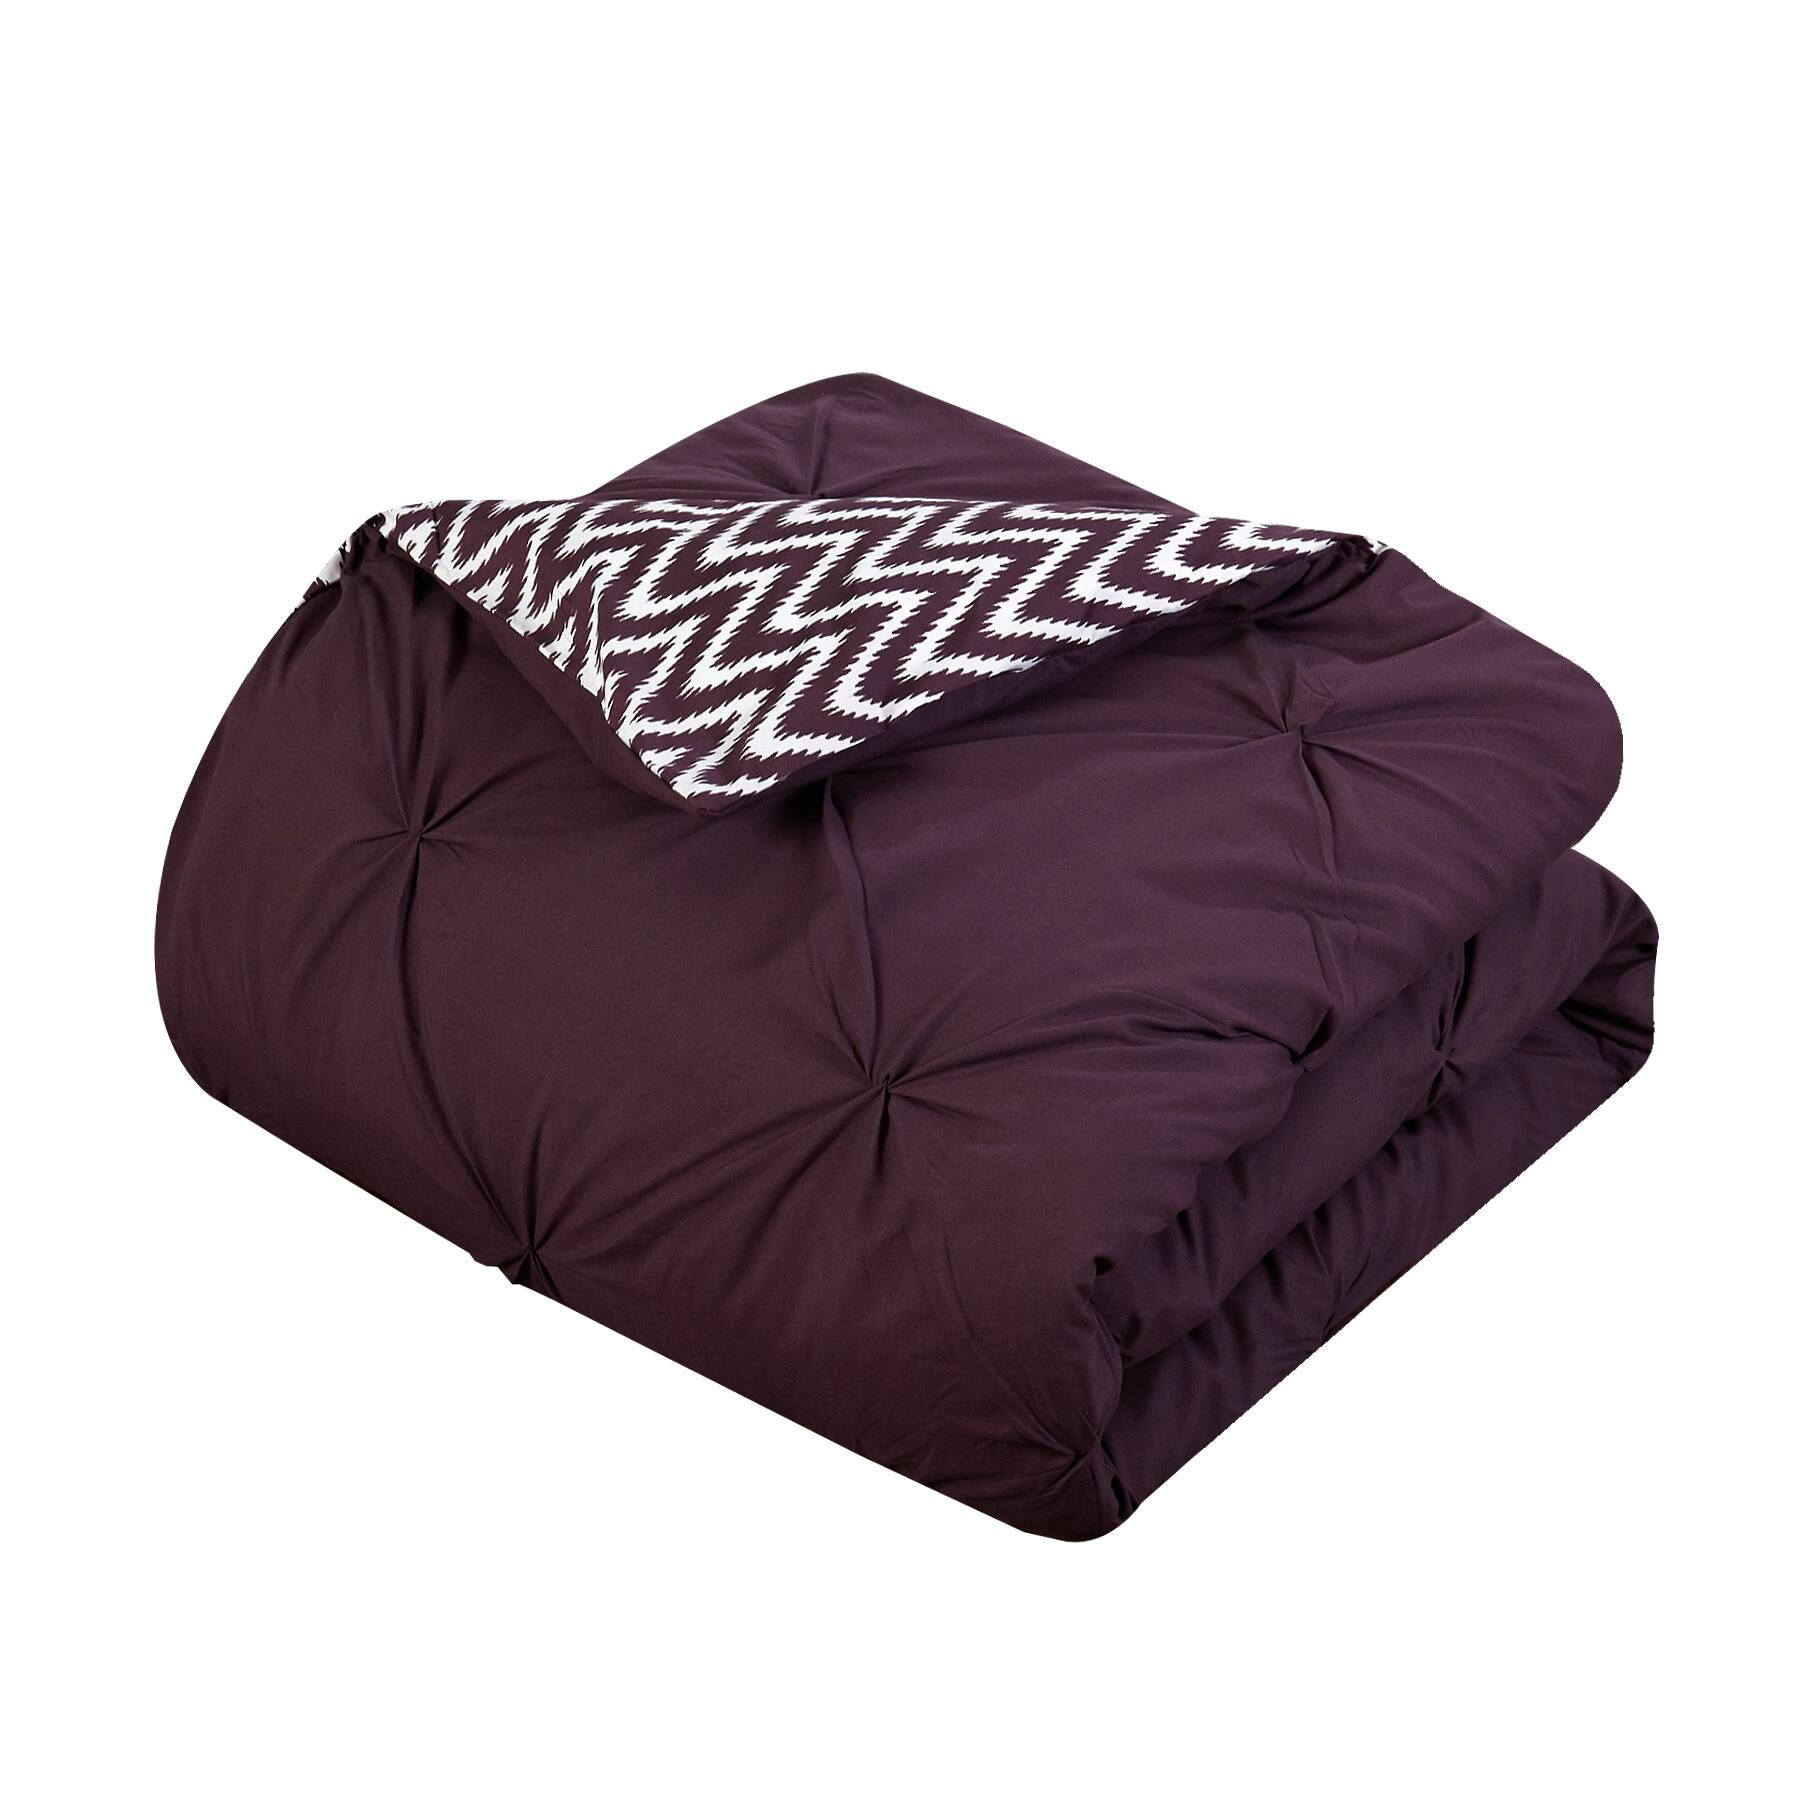 Erin Purple Pintuck Chevron Microfiber 8-Piece Bed-in-a-Bag with Sheet Set